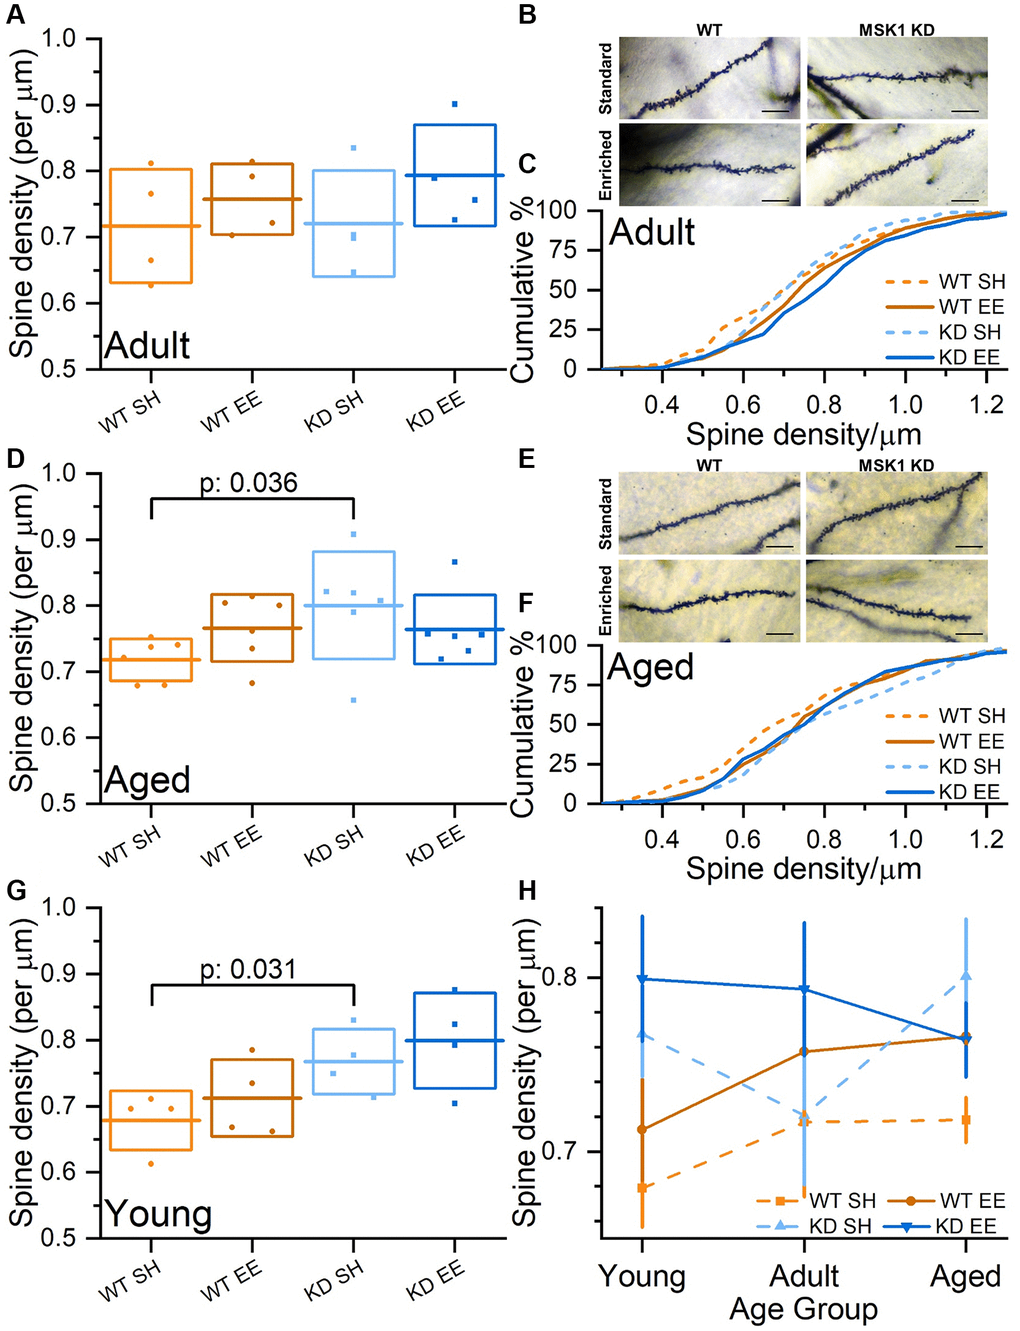 Experience-, age- and MSK1-dependent effects on CA1 stratum radiatum dendritic spine density. (A) In the Adult groups, when average CA1 stratum radiatum spine densities per animal are compared, there was a trend for enriched animals having greater spine density than standard-housed mice. (B) Representative Golgi images of secondary dendrites in stratum radiatum from CA1 pyramidal neurons across the four groups. Scale bars measure 10 μm. (C) Cumulative distribution of all spine density measurements across all groups showing rightward shifts of spine density in enriched groups. (D) In the Aged groups, when average CA1 stratum radiatum spine densities per animal are compared, there was a tendency for WT mice, but not MSK1 KD mice to show increased spine density after enrichment. (E) Representative Golgi images of secondary dendrites in stratum radiatum from CA1 pyramidal neurons across the four groups. Scale bars measure 10 μm. (F) Cumulative distribution of all CA1 stratum radiatum spine density measurements across all groups showing rightward shifts of spine density in enriched WT and standard-housed MSK1 KD mice. (G) Data from the Young groups are from Privitera et al., (2020) [36]. An across age group Univariate analysis with Genotype (WT or MSK1 KD), Treatment (SH or EE) and Age (Young, Adult and Aged) as independent variables revealed a main effect of Genotype (F(1,44) = 8.18, p: 0.006). A simple main Effects Analysis (Sidak correction) revealed a significant difference between standard-housed WT and MSK1 KD in the Young and Aged groups (F(1,44) = 4.96, p: 0.031 (G) and F(1,44) = 4.68, p: 0.036 (D), respectively confirming a previous report [34]. (H) A summary of CA1 stratum radiatum spine density changes across age, genotype and housing condition on a per animal basis (mean data from A, D, G). Enrichment consistently enhances spine density in WT mice. MSK1 KD mice typically have greater spine density, but the pattern over time, and the effects of enrichment are not correlated. In A, D, G, individual data points represent mean spine density values from individual animals (n = 4 (A, G) or 6 (D) mice), the horizontal line is the mean, and the box reflects ± 1 SD of the mean. In H data are presented as mean ± SEM. Additional CA1 stratum radiatum spine density data (per group and per animal) can be found in Supplementary Figure 3.